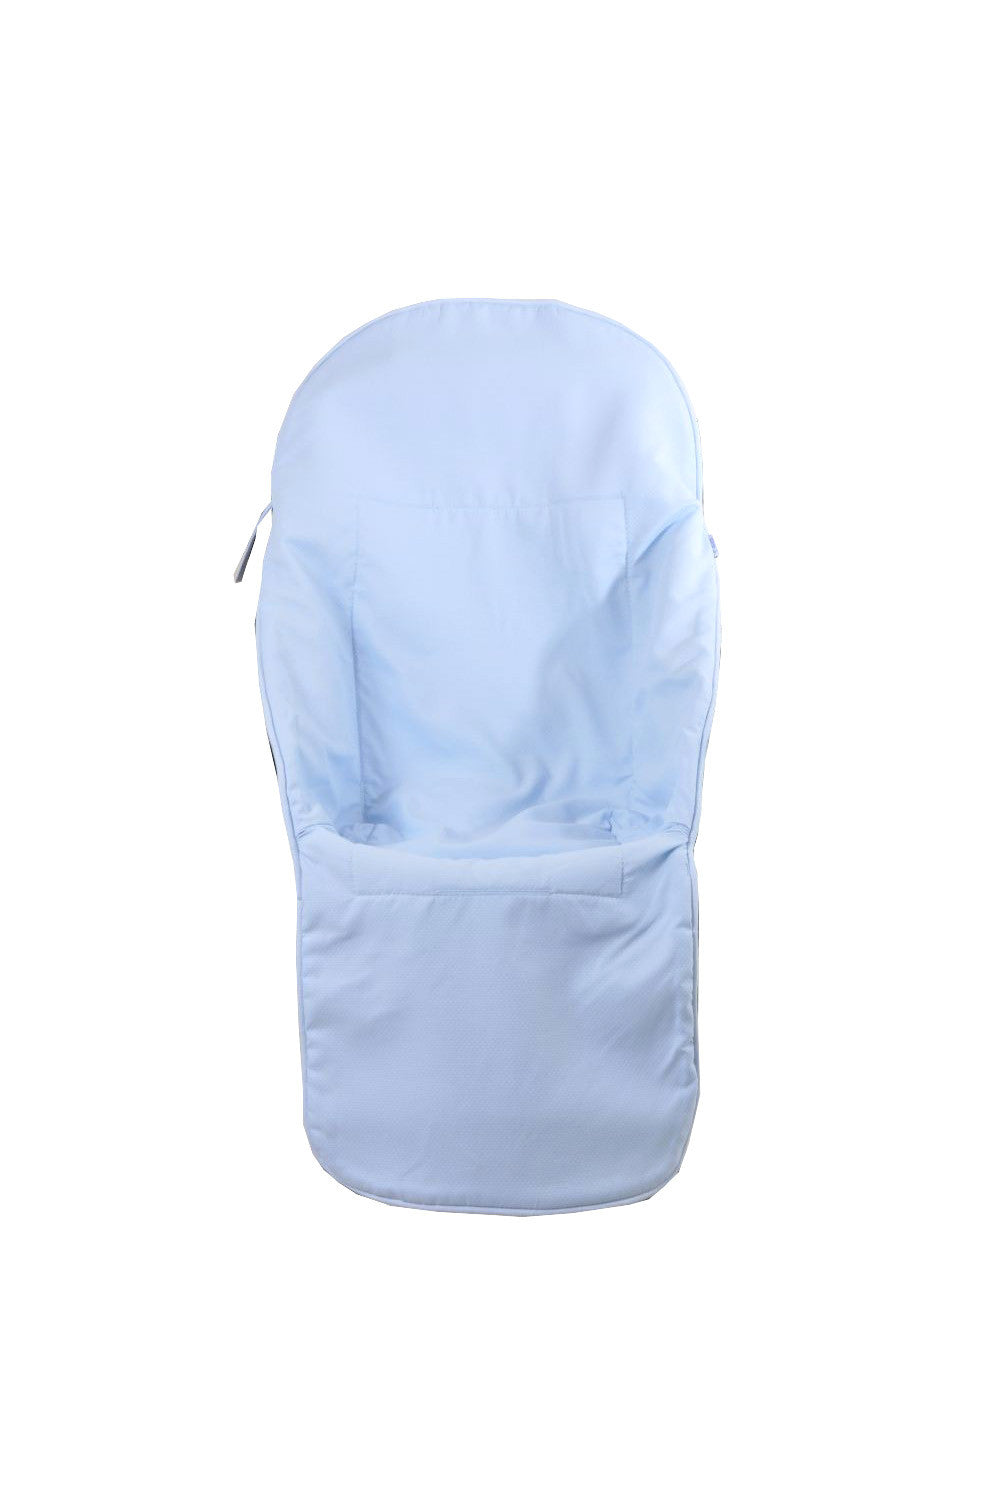 Cotton Candy Pushchair liner ( compatible with bugaboo strollers )